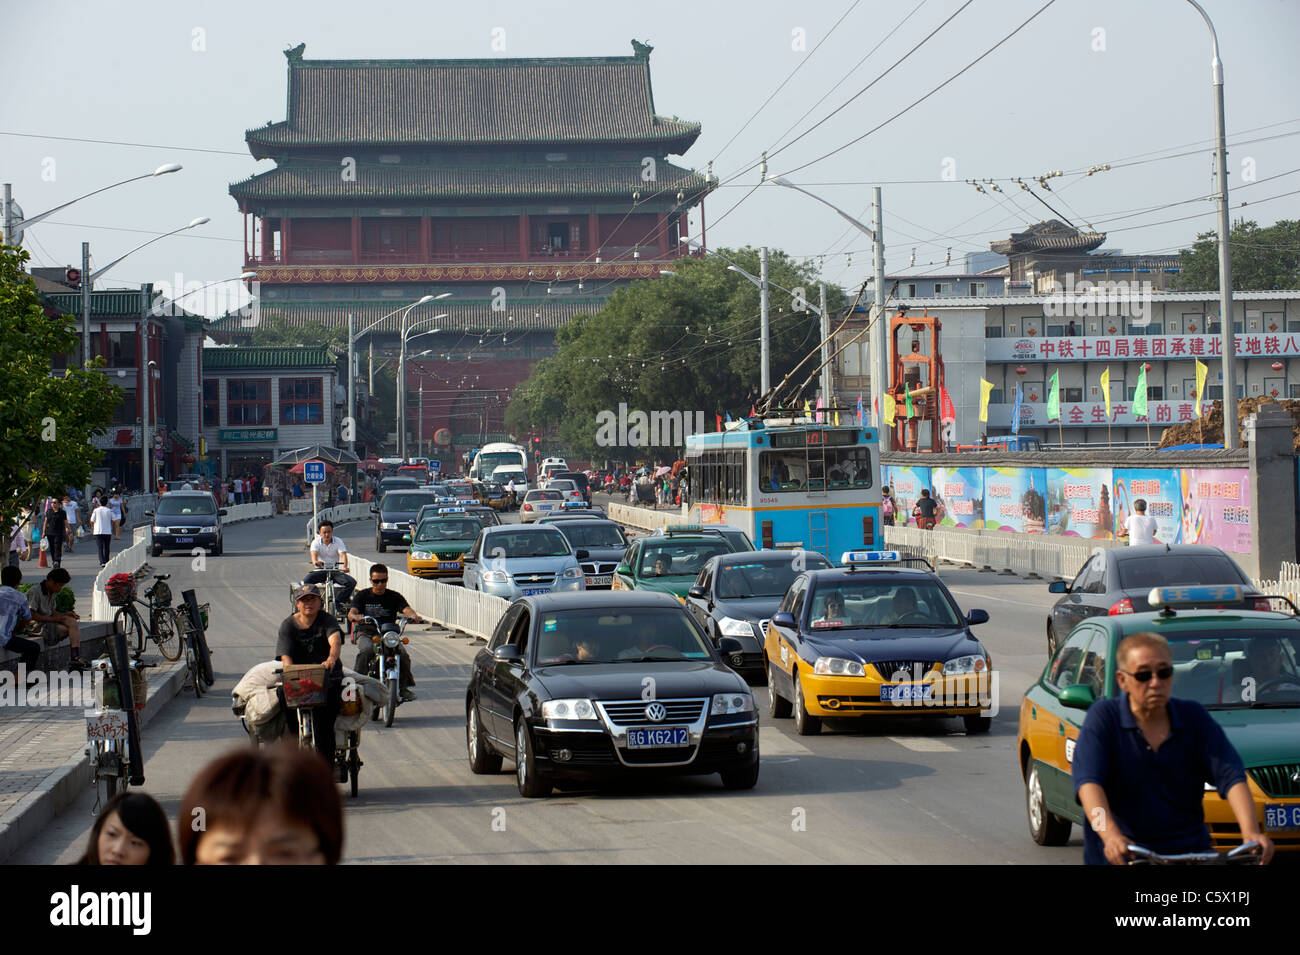 A general scene of Drum Tower area in Beijing, China.03-Aug-2011 Stock Photo